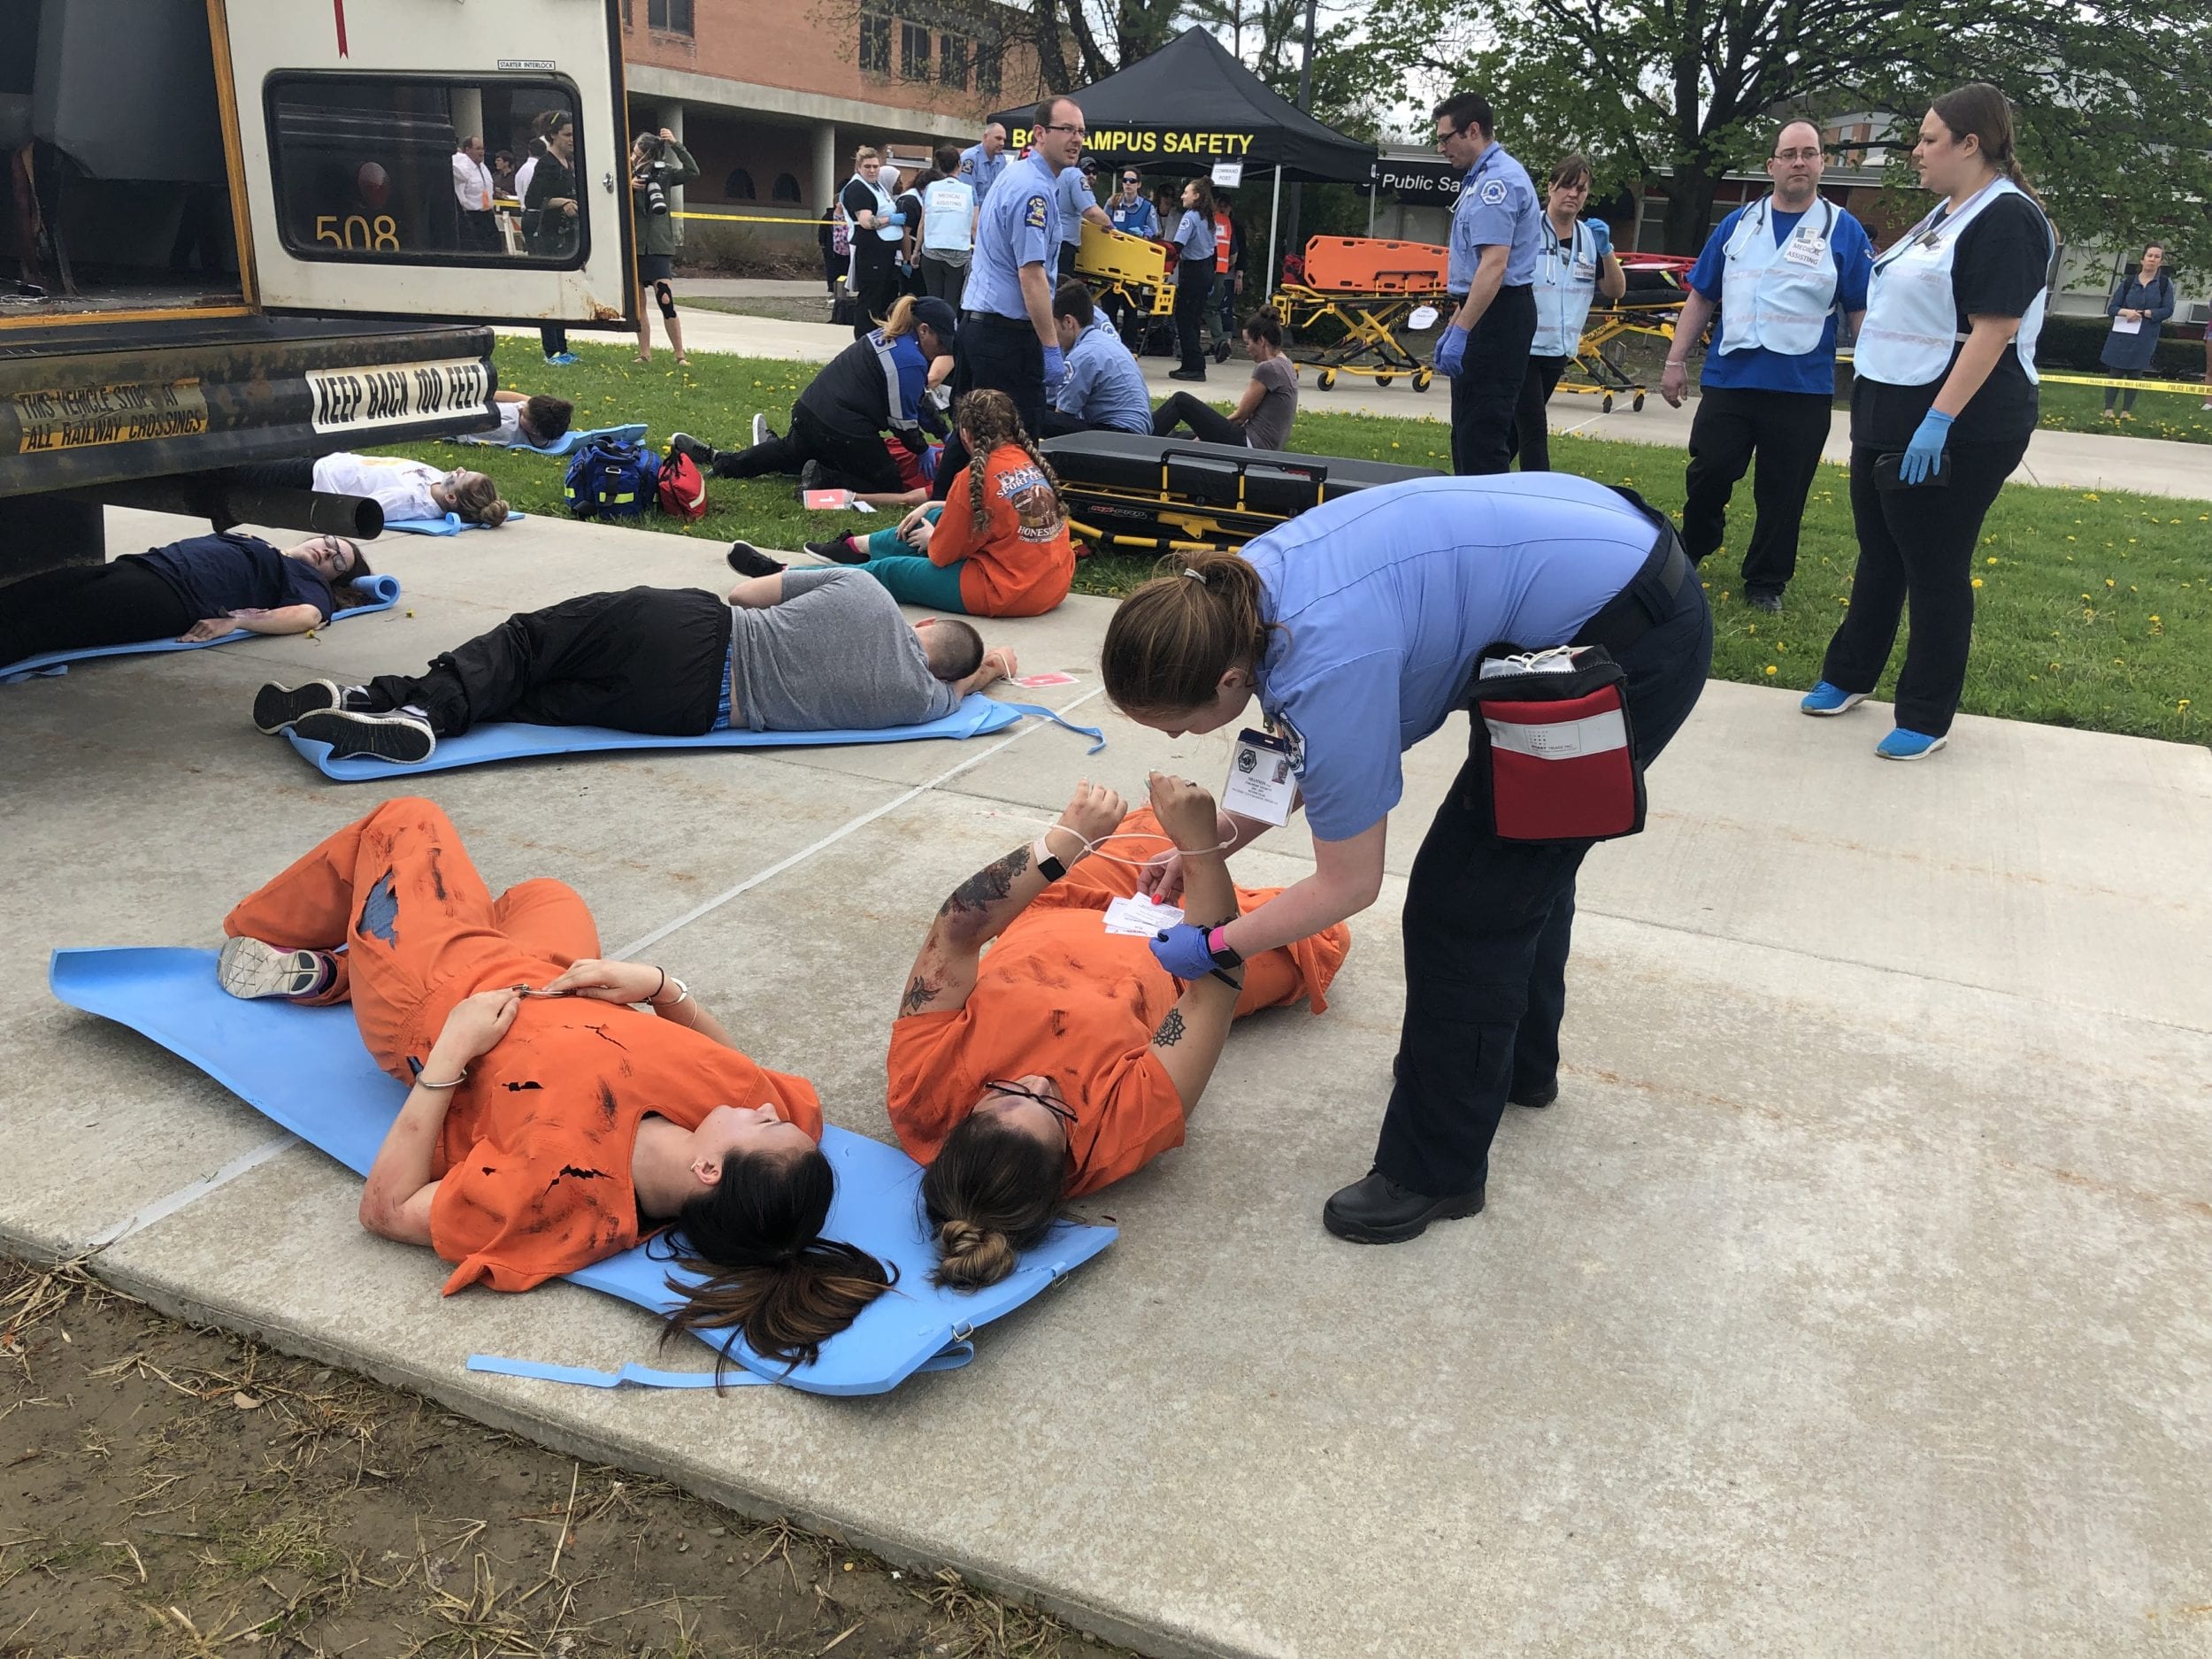 Patients are evaluated during the Mock Disaster